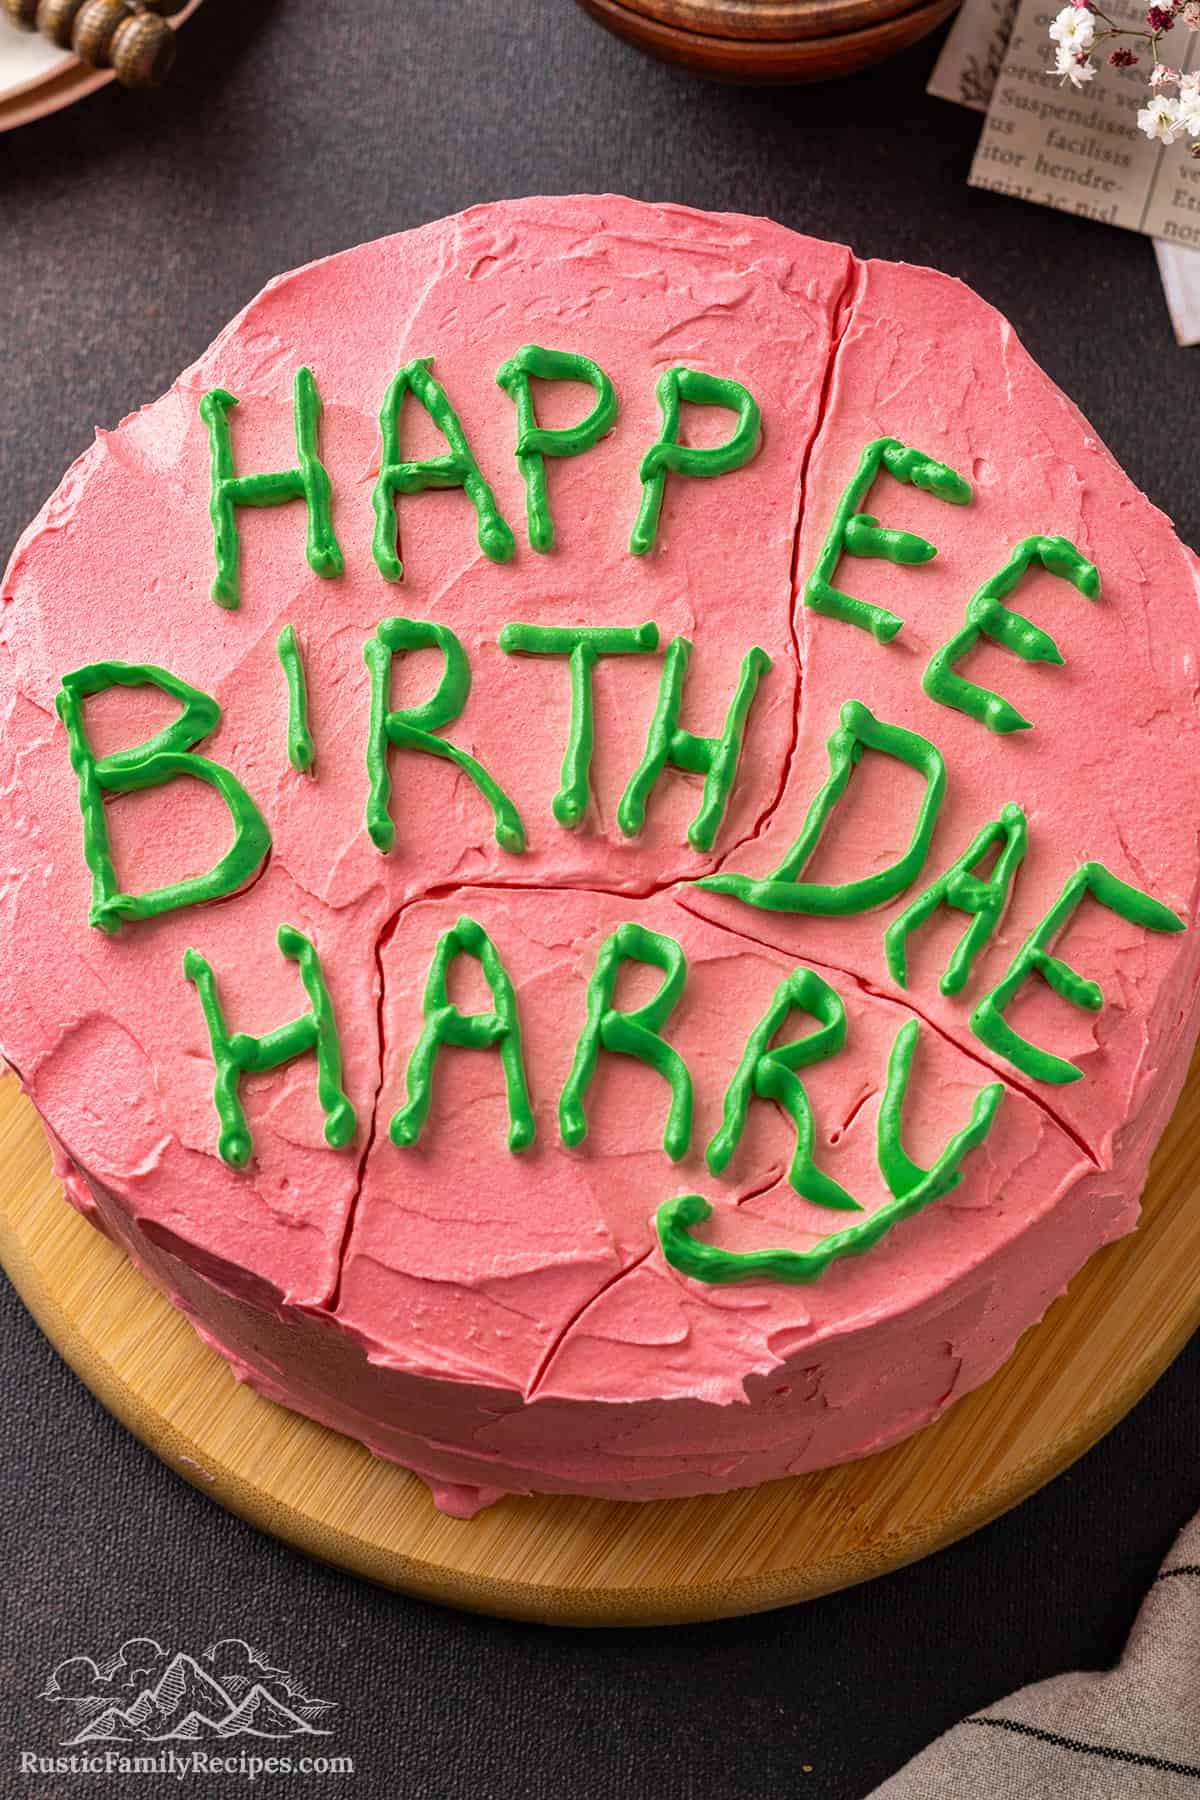 Overhead close up view of a Harry Potter birthday cake frosted with pink frosting and "Happy Birthday Harry" written on top with green icing.